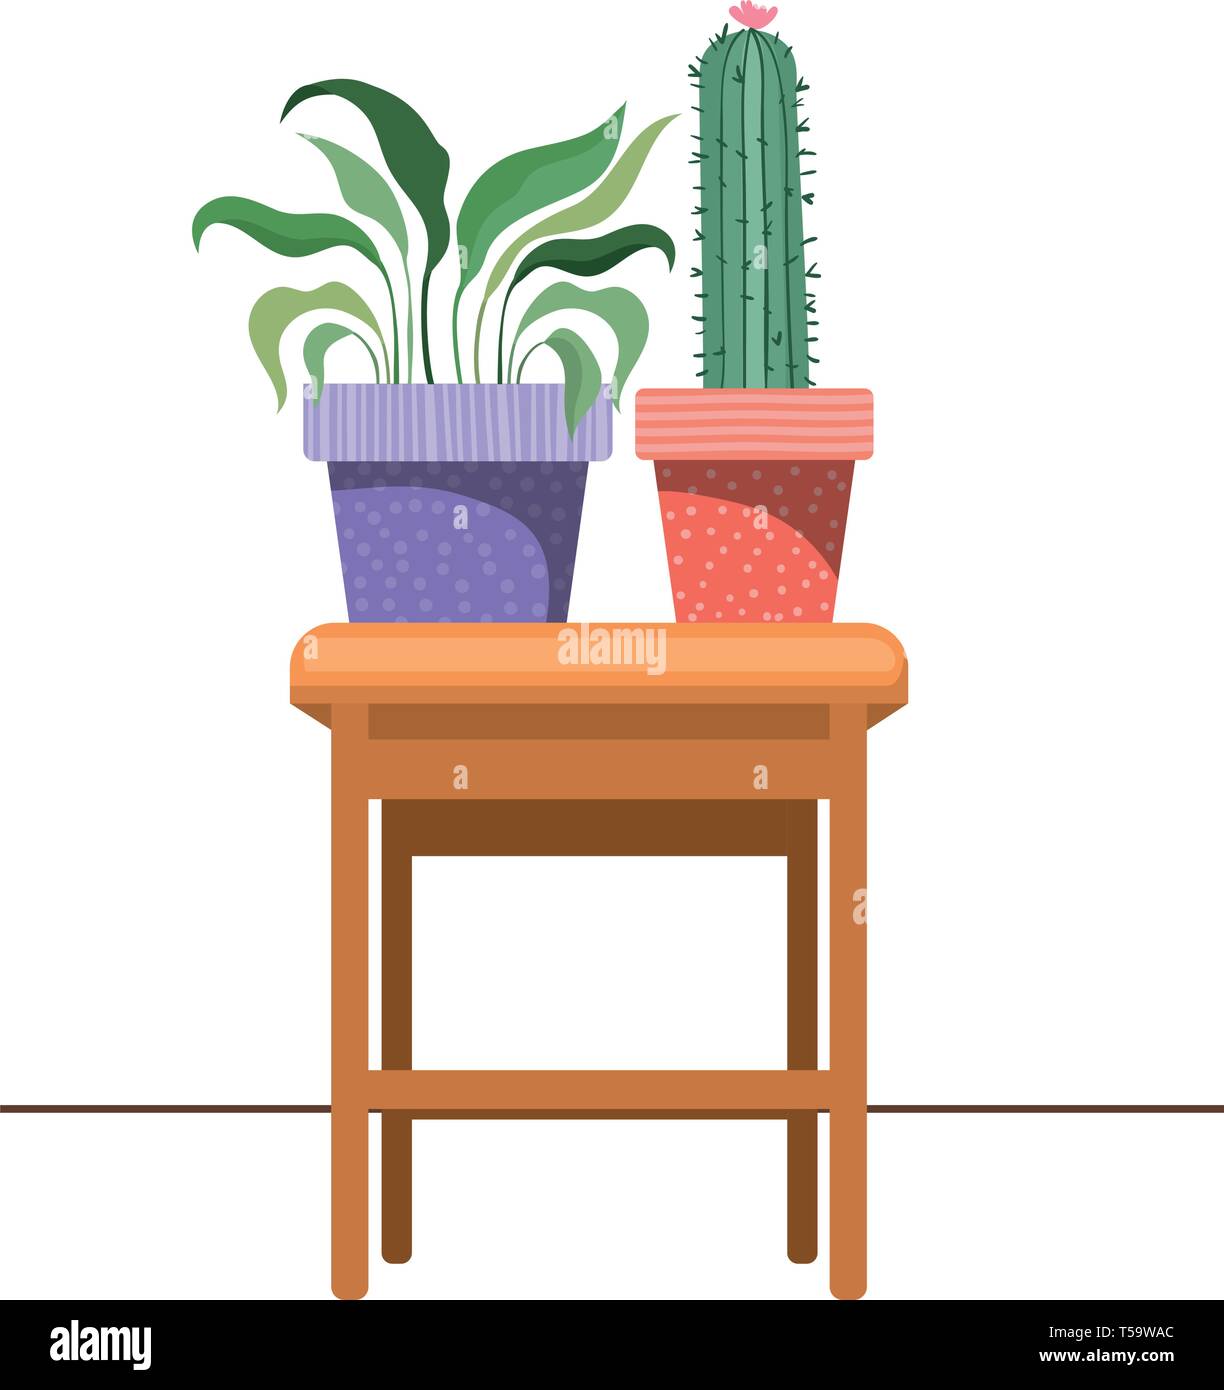 cactus with potted on the table icon Stock Vector